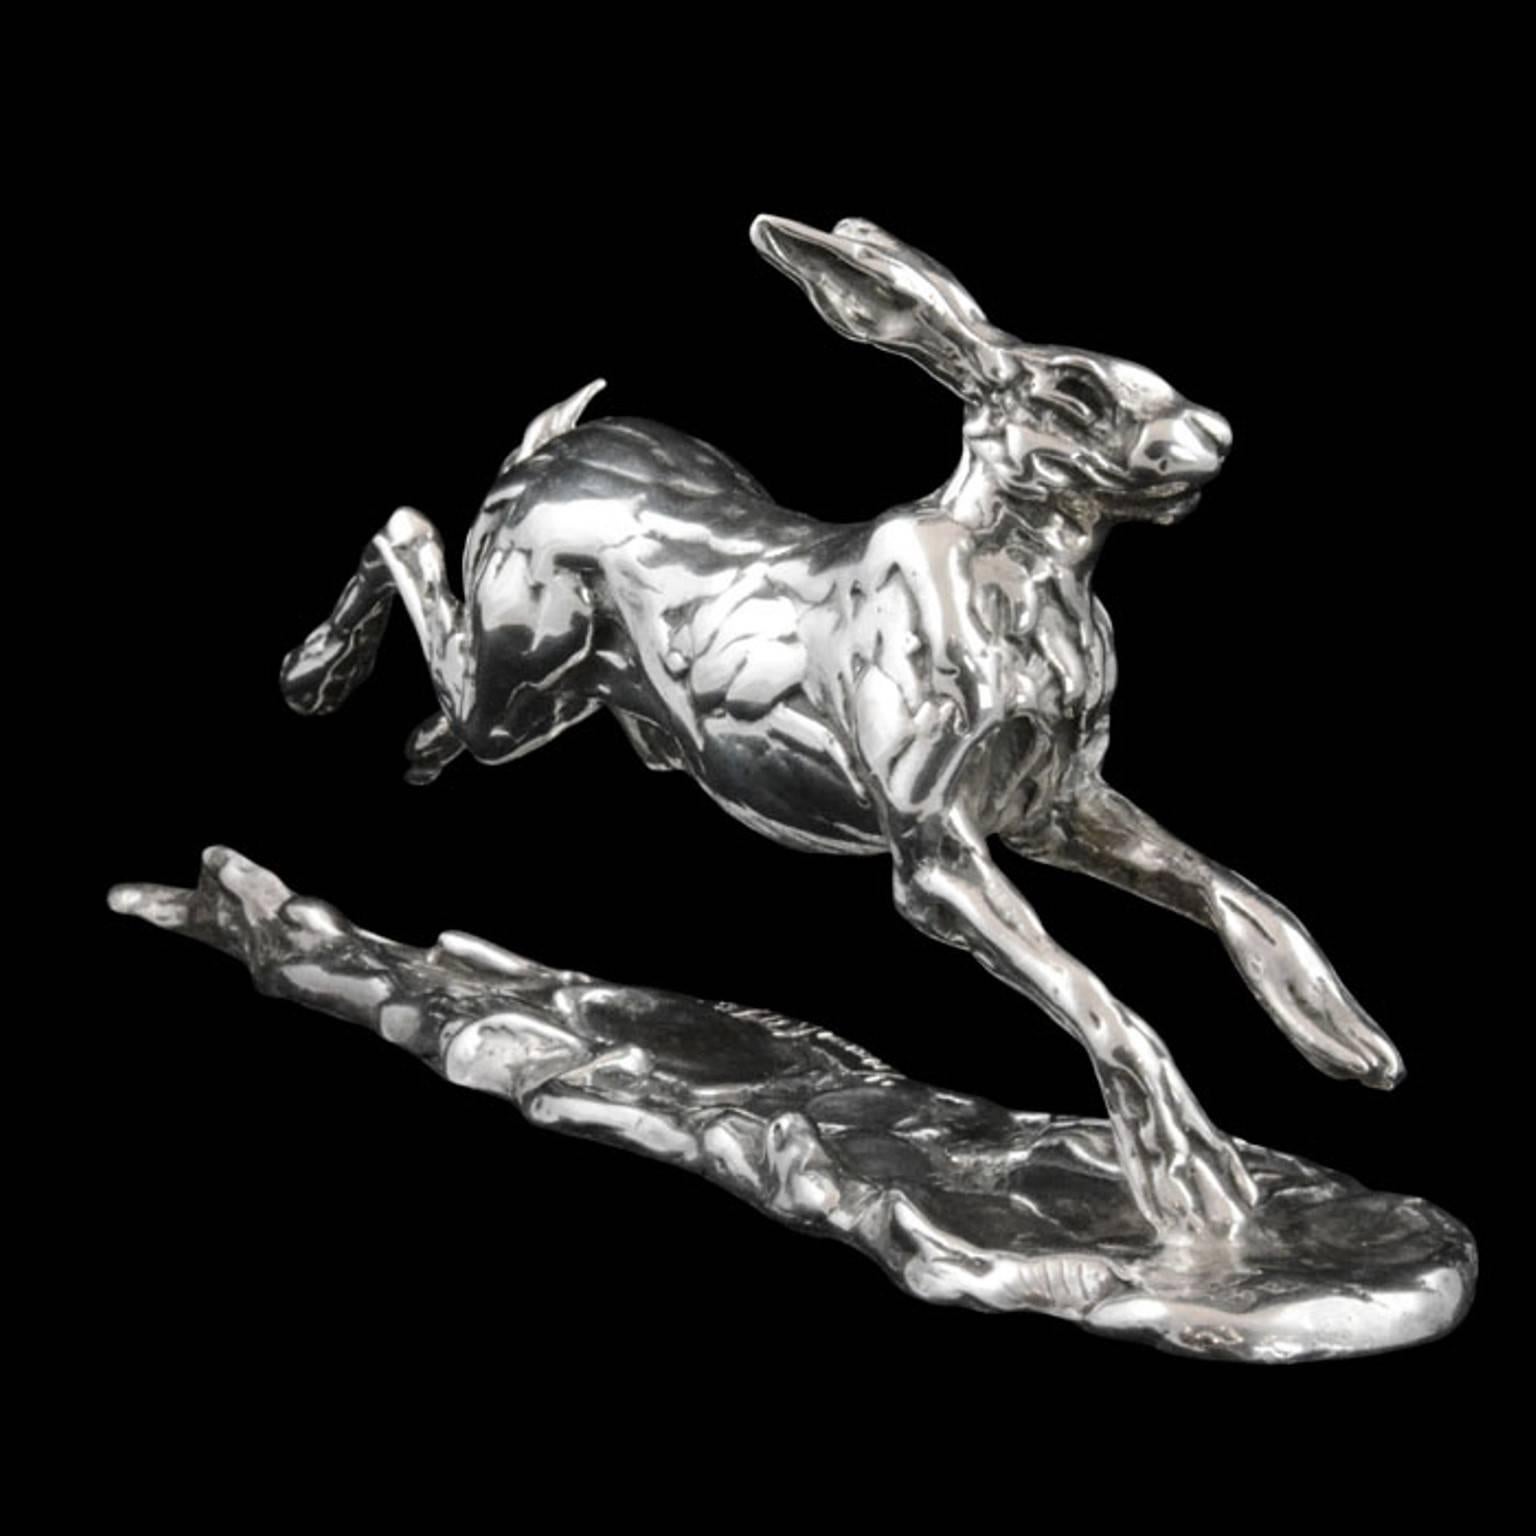 Running Hare - Contemporary Sculpture by Lucy Kinsella